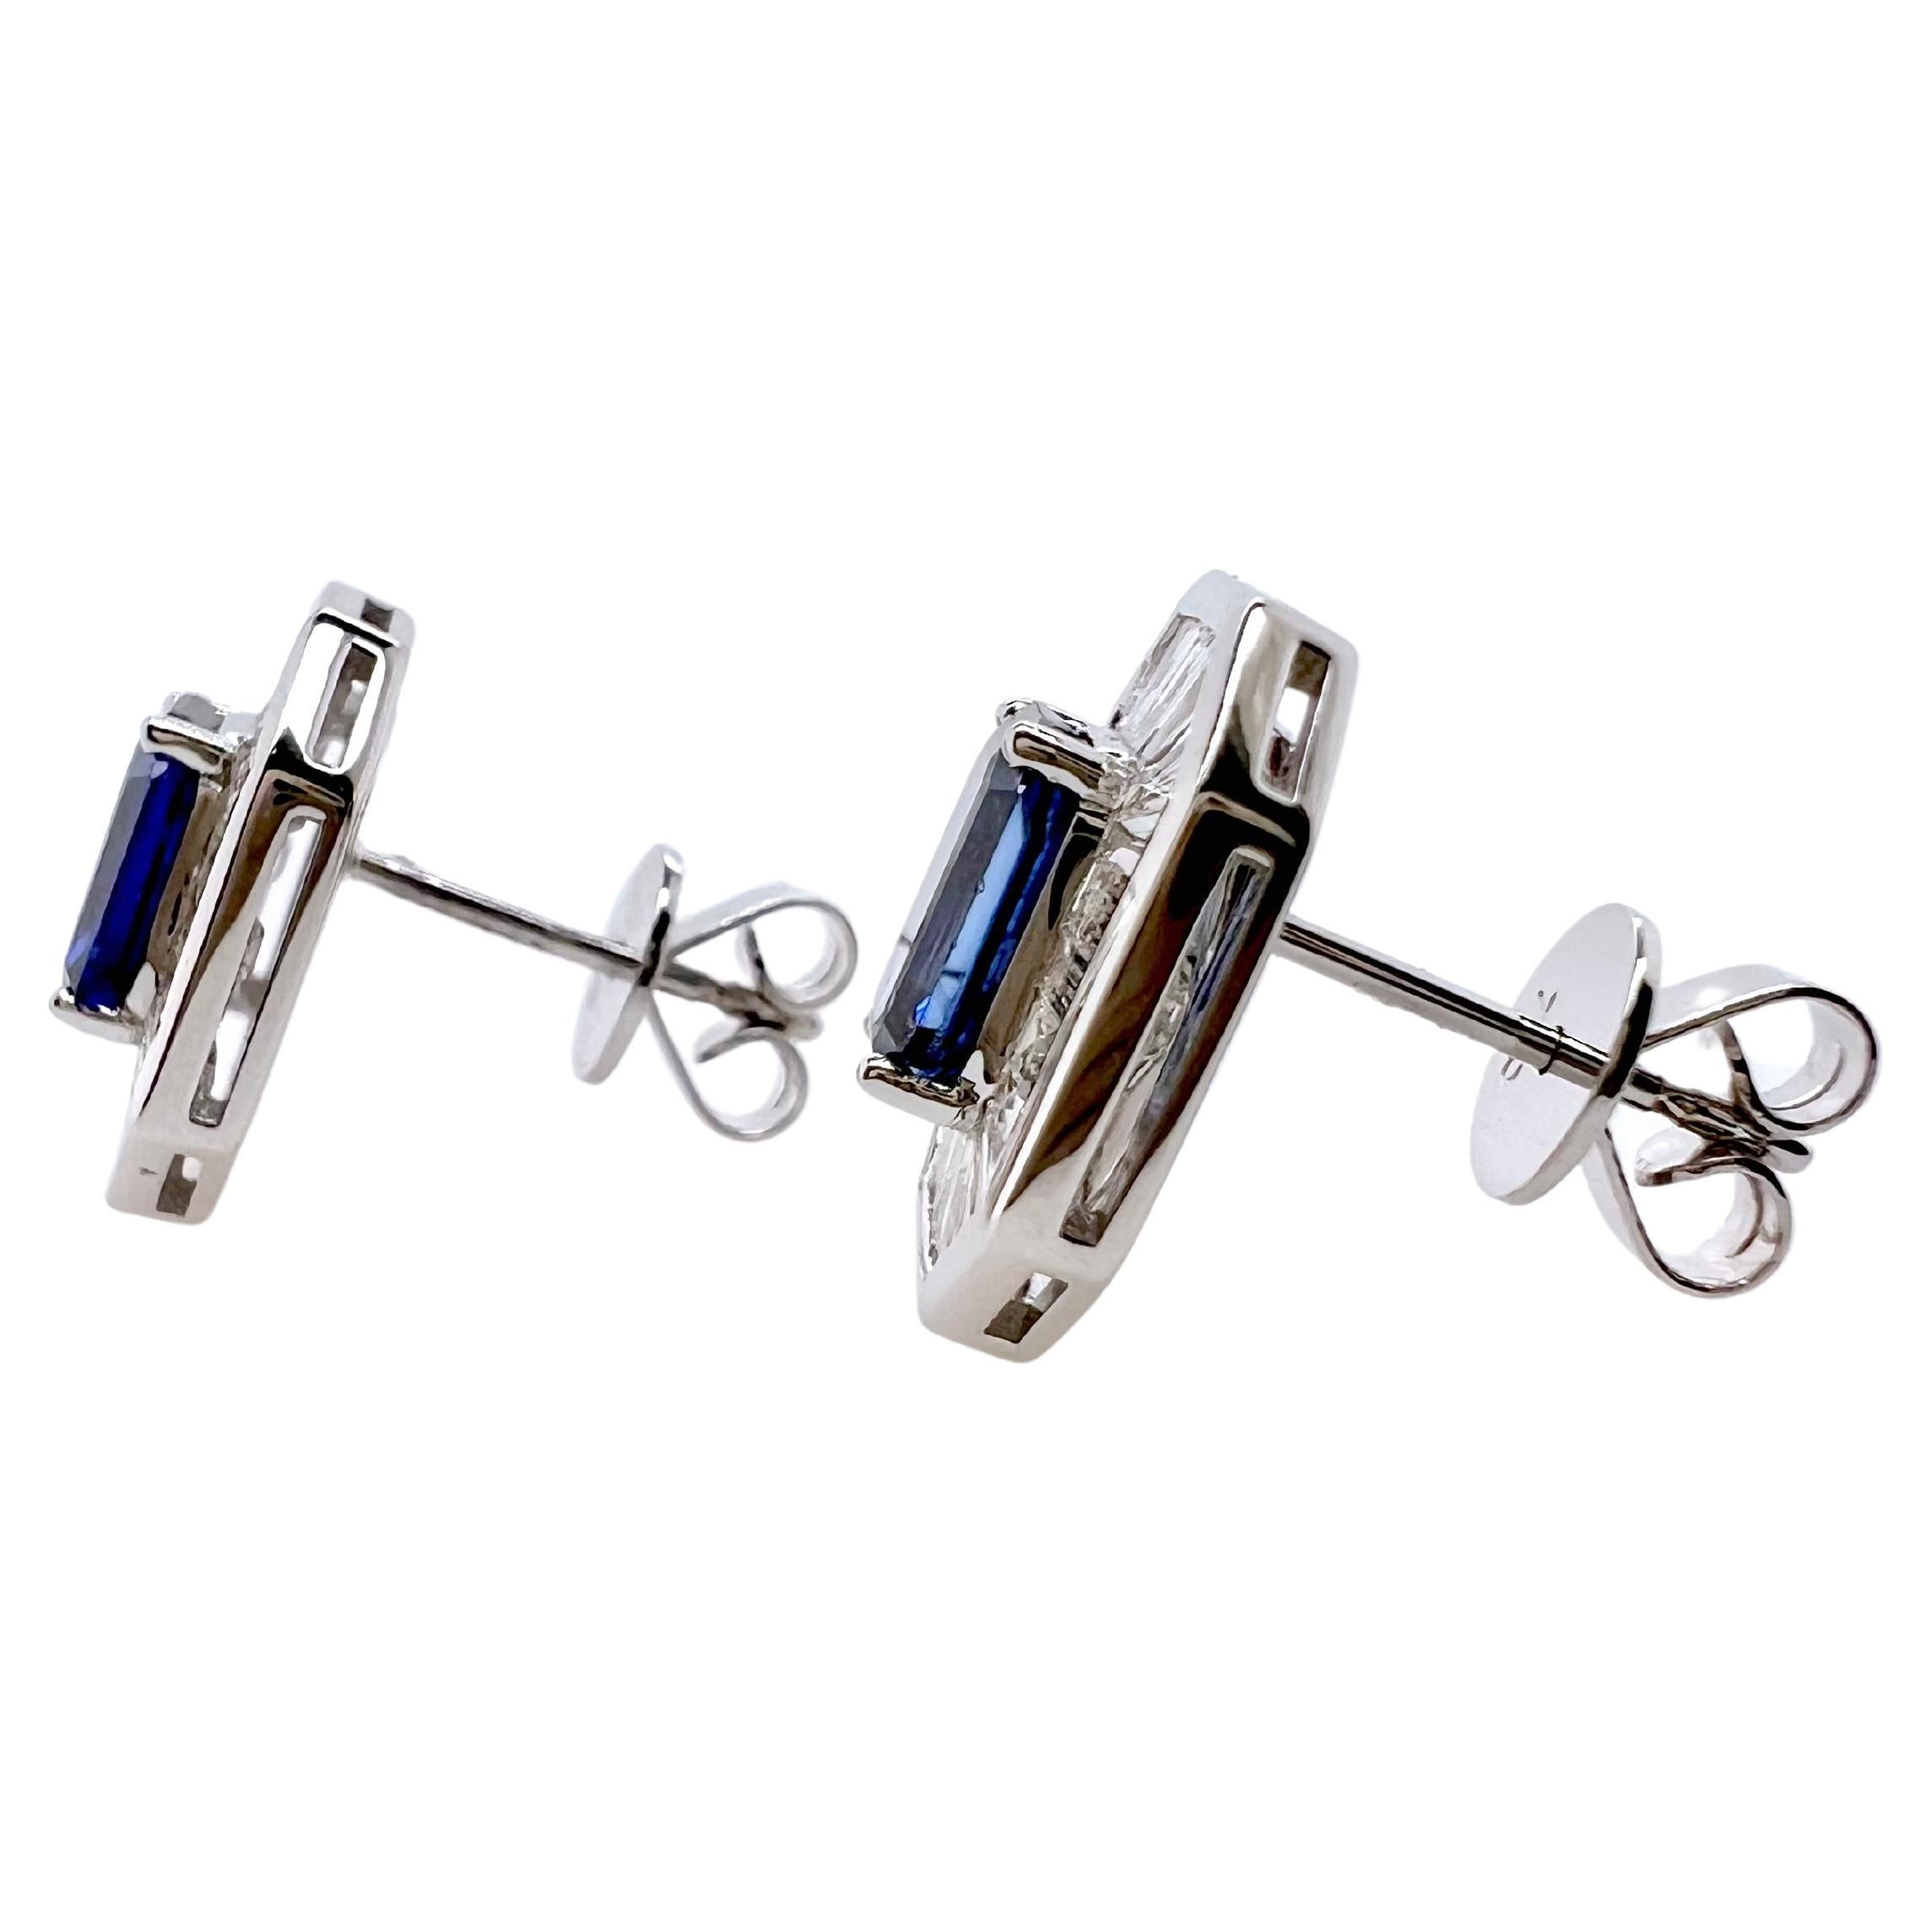 This gorgeous pair of emerald cut blue sapphire are surrounded by stunning diamond baguettes in 18k white gold . 
 The baguettes and frame of the earrings mimic and accentuate the shape of the emerald cut, royal blue colored sapphire.  These are